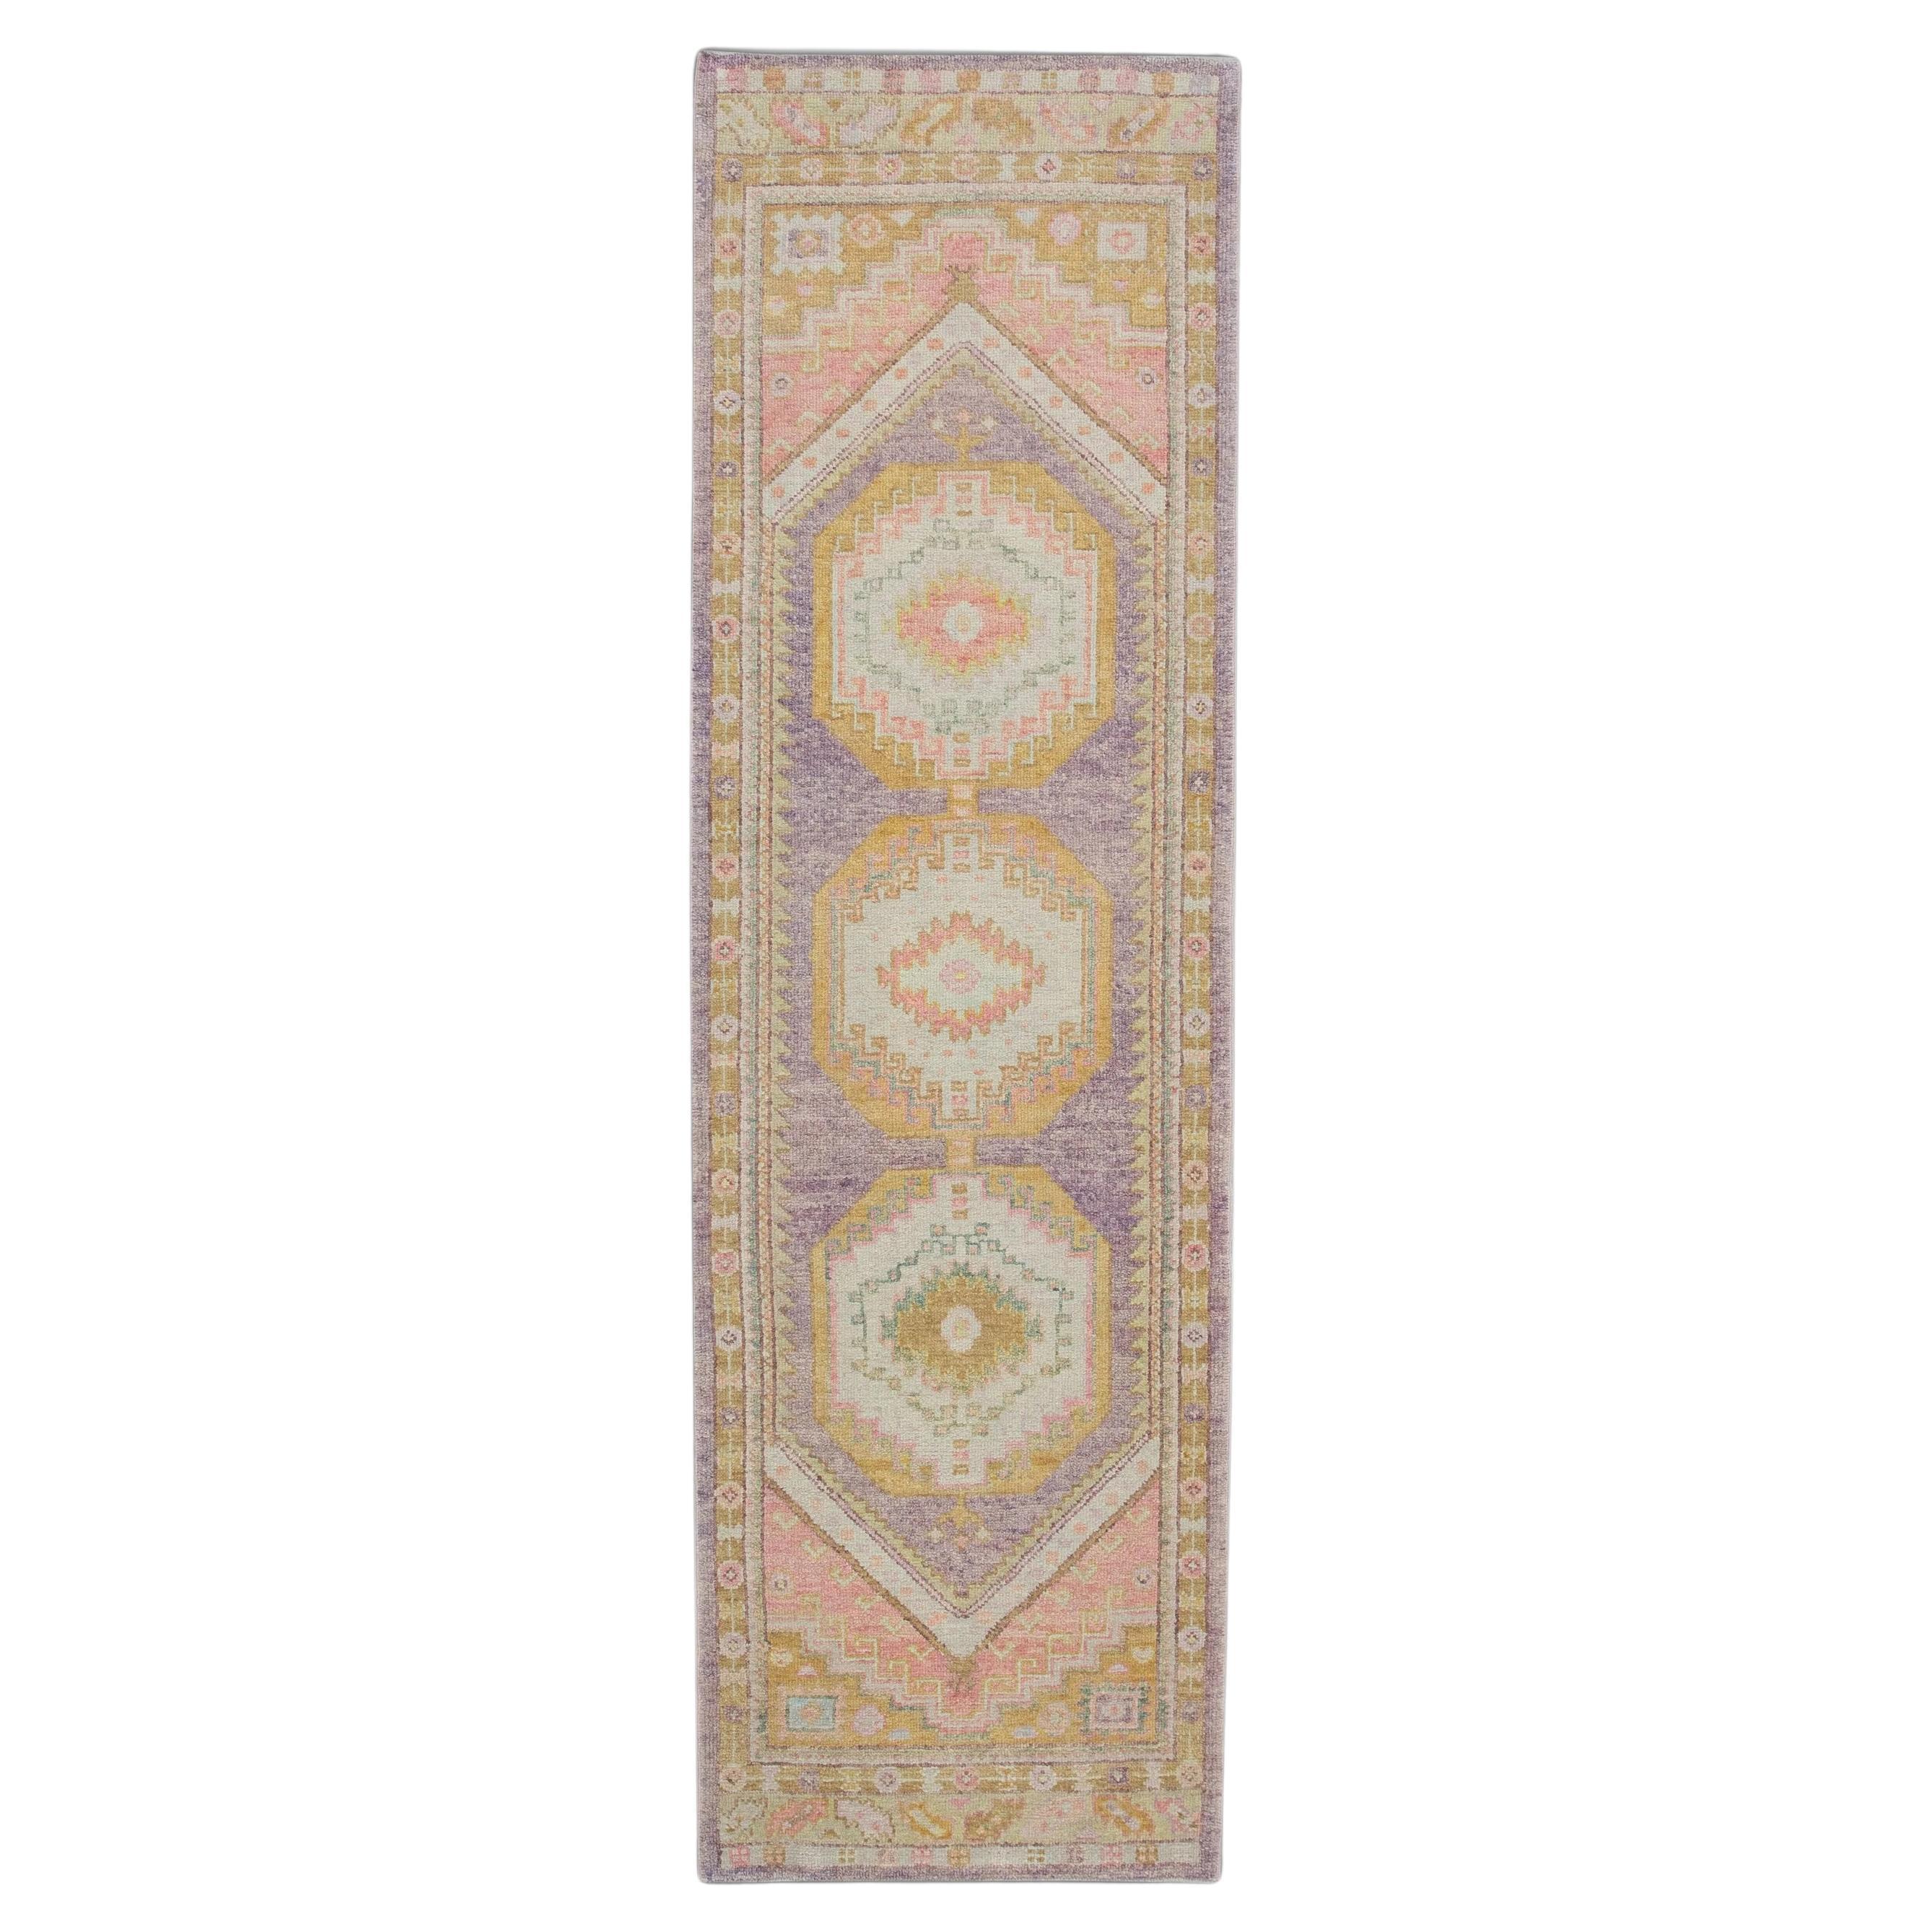 Multicolor Handwoven Wool Turkish Oushak Rug with Medallion Design 3' x 10'3"